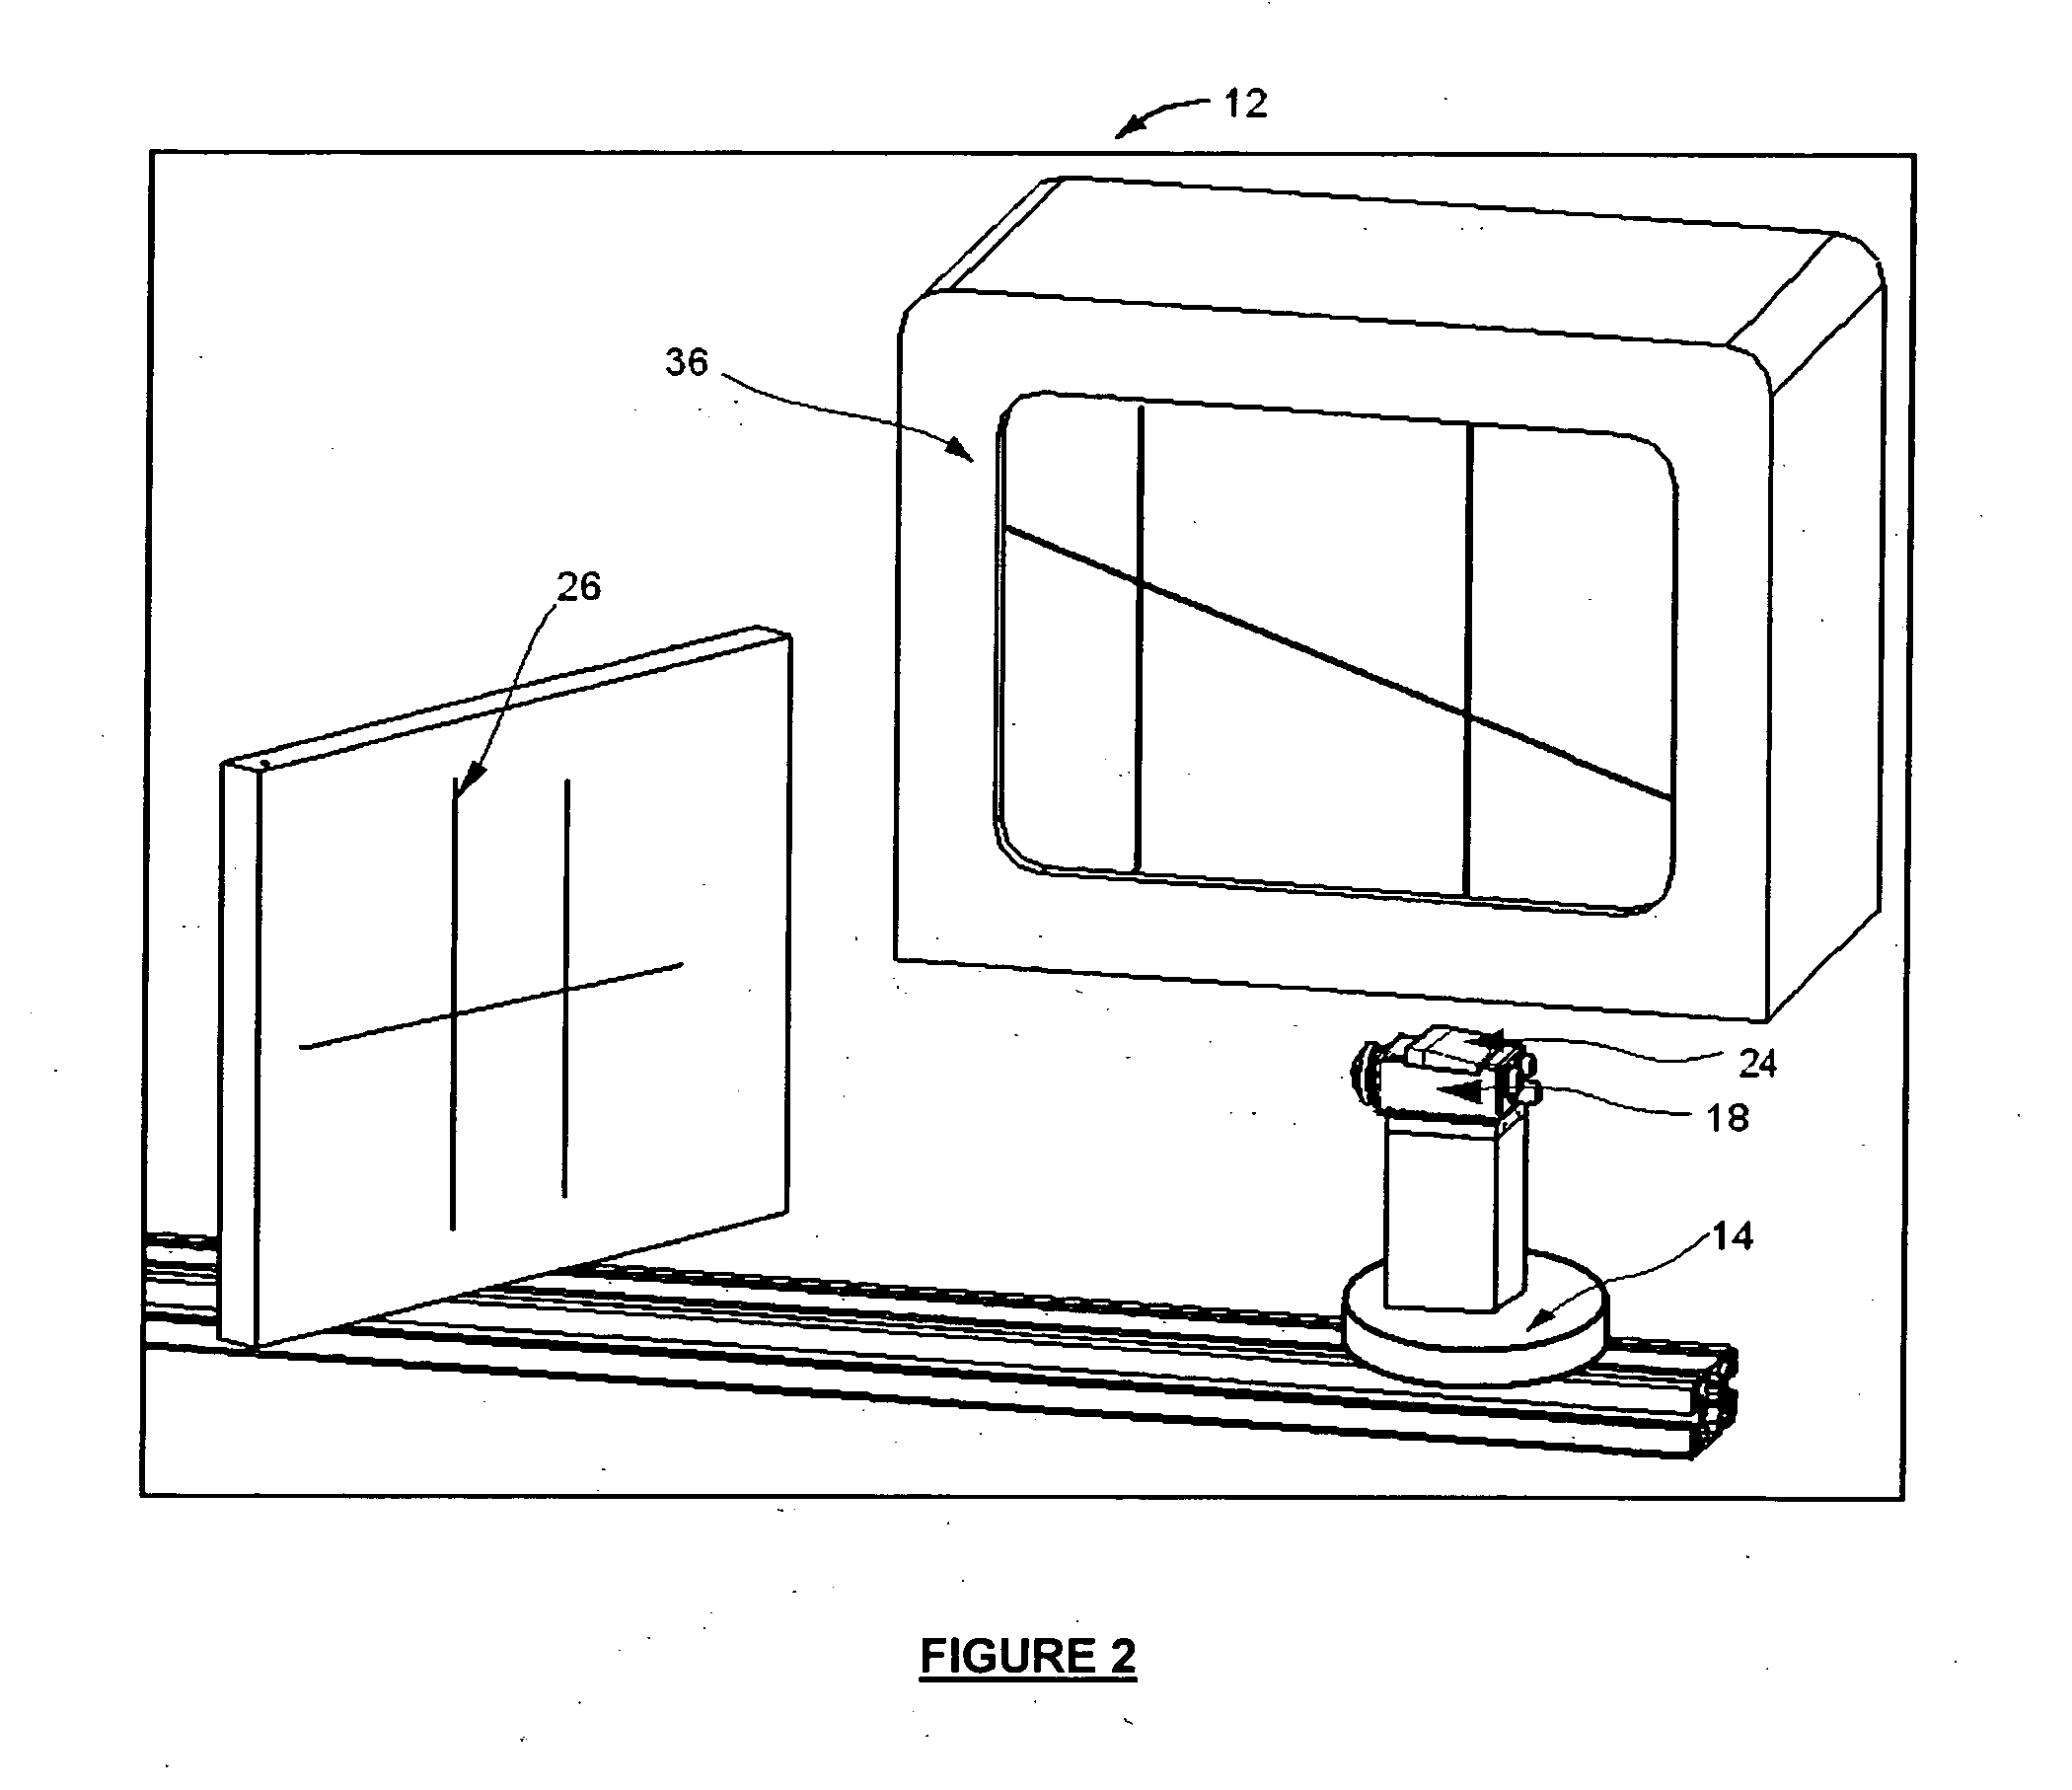 System and method for inspecting the interior surface of a pipeline